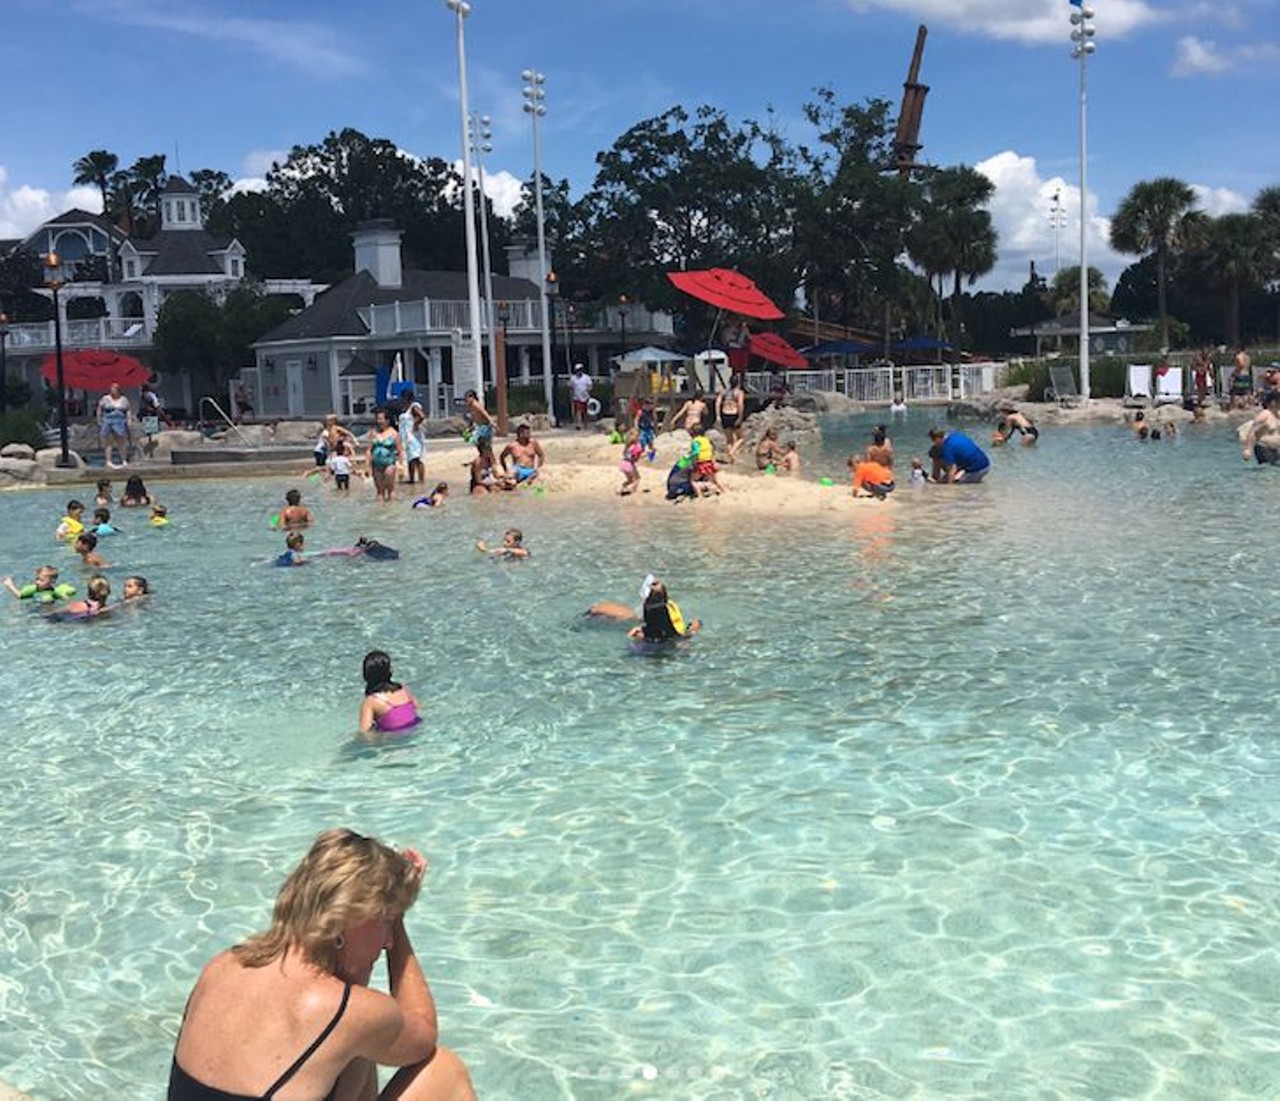 Disney&#146;s Beach Club Resort 
1800 Epcot Resorts Blvd., Lake Buena Vista | 407-934-8000 | 9 a.m. - 10 p.m. (Stormalong Bay), 7 a.m. - 11 p.m. (leisure pools)
With Stormalong Bay and three leisure pools that each include steaming whirlpool spas, you&#146;re bound to find a swimming area of your liking. The Stormalong Bay is a 3-acre beachside water park with currents and a sand-bottomed pool. Use your adventurous side and climb a life-sized shipwreck to plummet down a 230-foot-long waterslide. If you&#146;re relaxed side is taking over for the day, you can check out the lazy river where you can rent an inner tube. There are also two pretty big leisure pools: Disney&#146;s Yacht Club Resort pool and the Dunes Cove pool, which is technically for the convenience of guests at Disney&#146;s Beach Club Villas, but all resort guests are welcome. However, you cannot bring any additional guests.
Photo via joseph_saldana_/Instagram